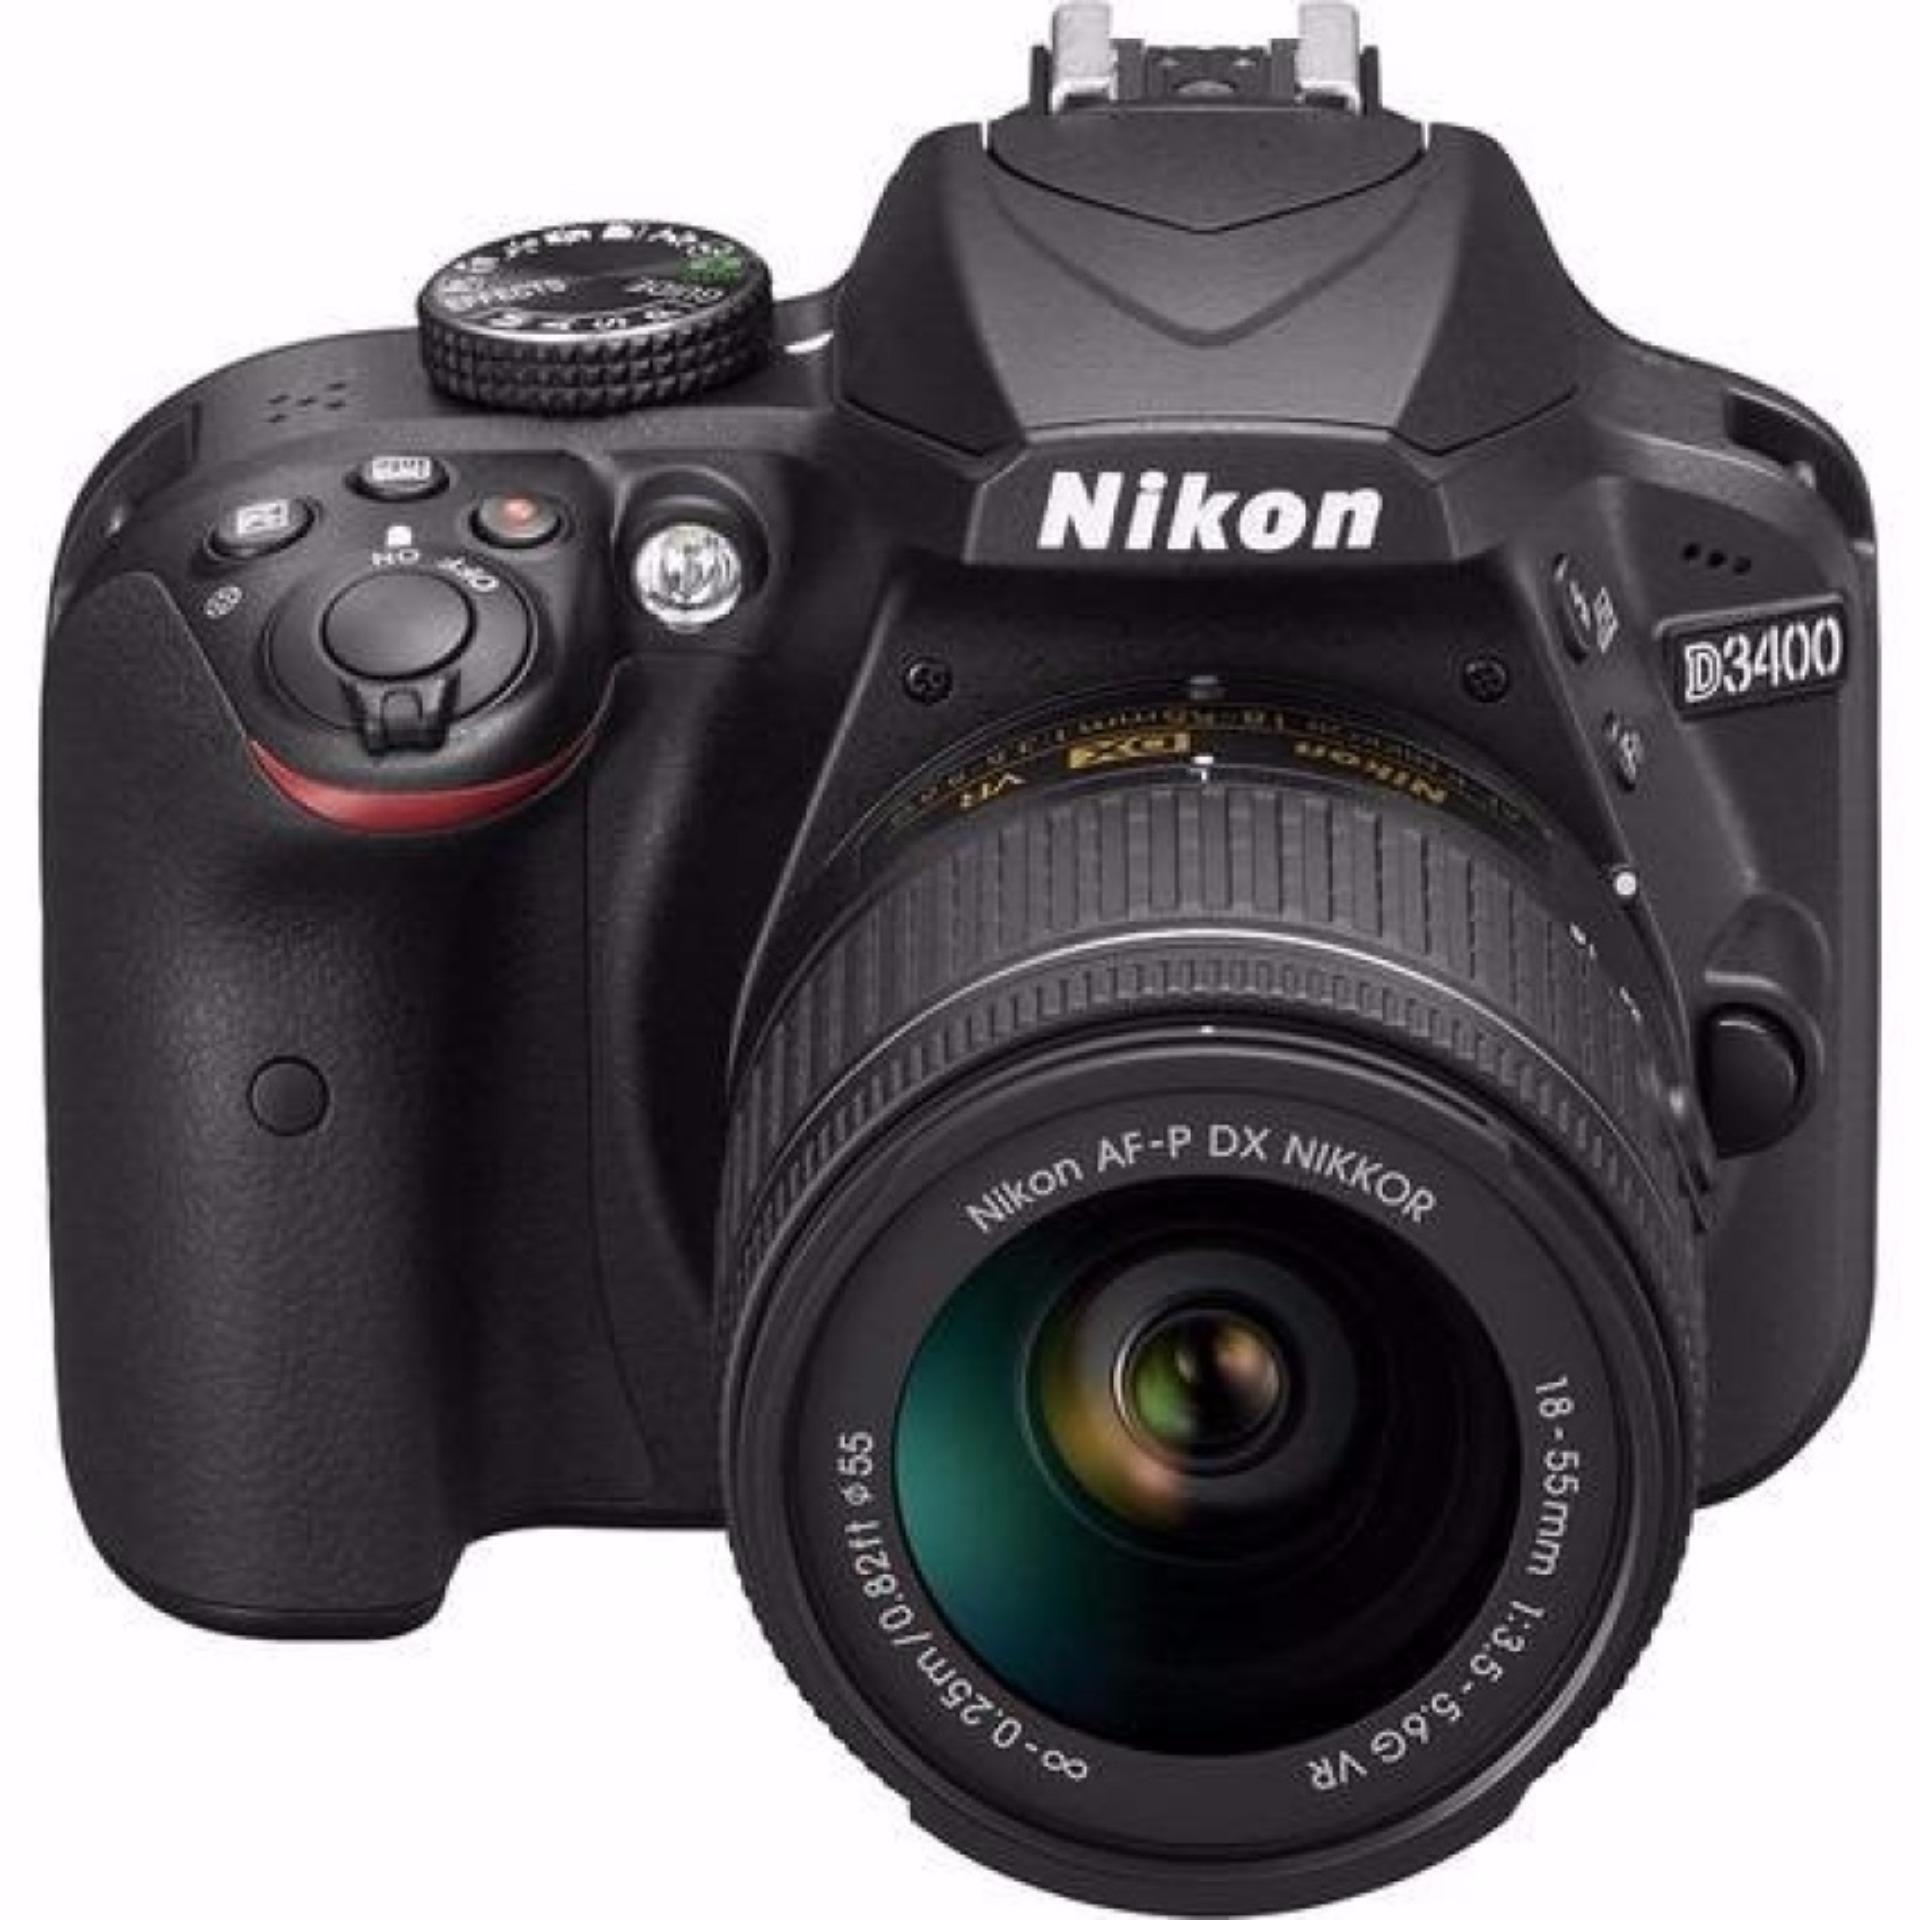 Nikon D3400 DSLR with 18-55mm Lens + Extra Nikon Battery + Nikon Promotion (Please note that price is after Cash...